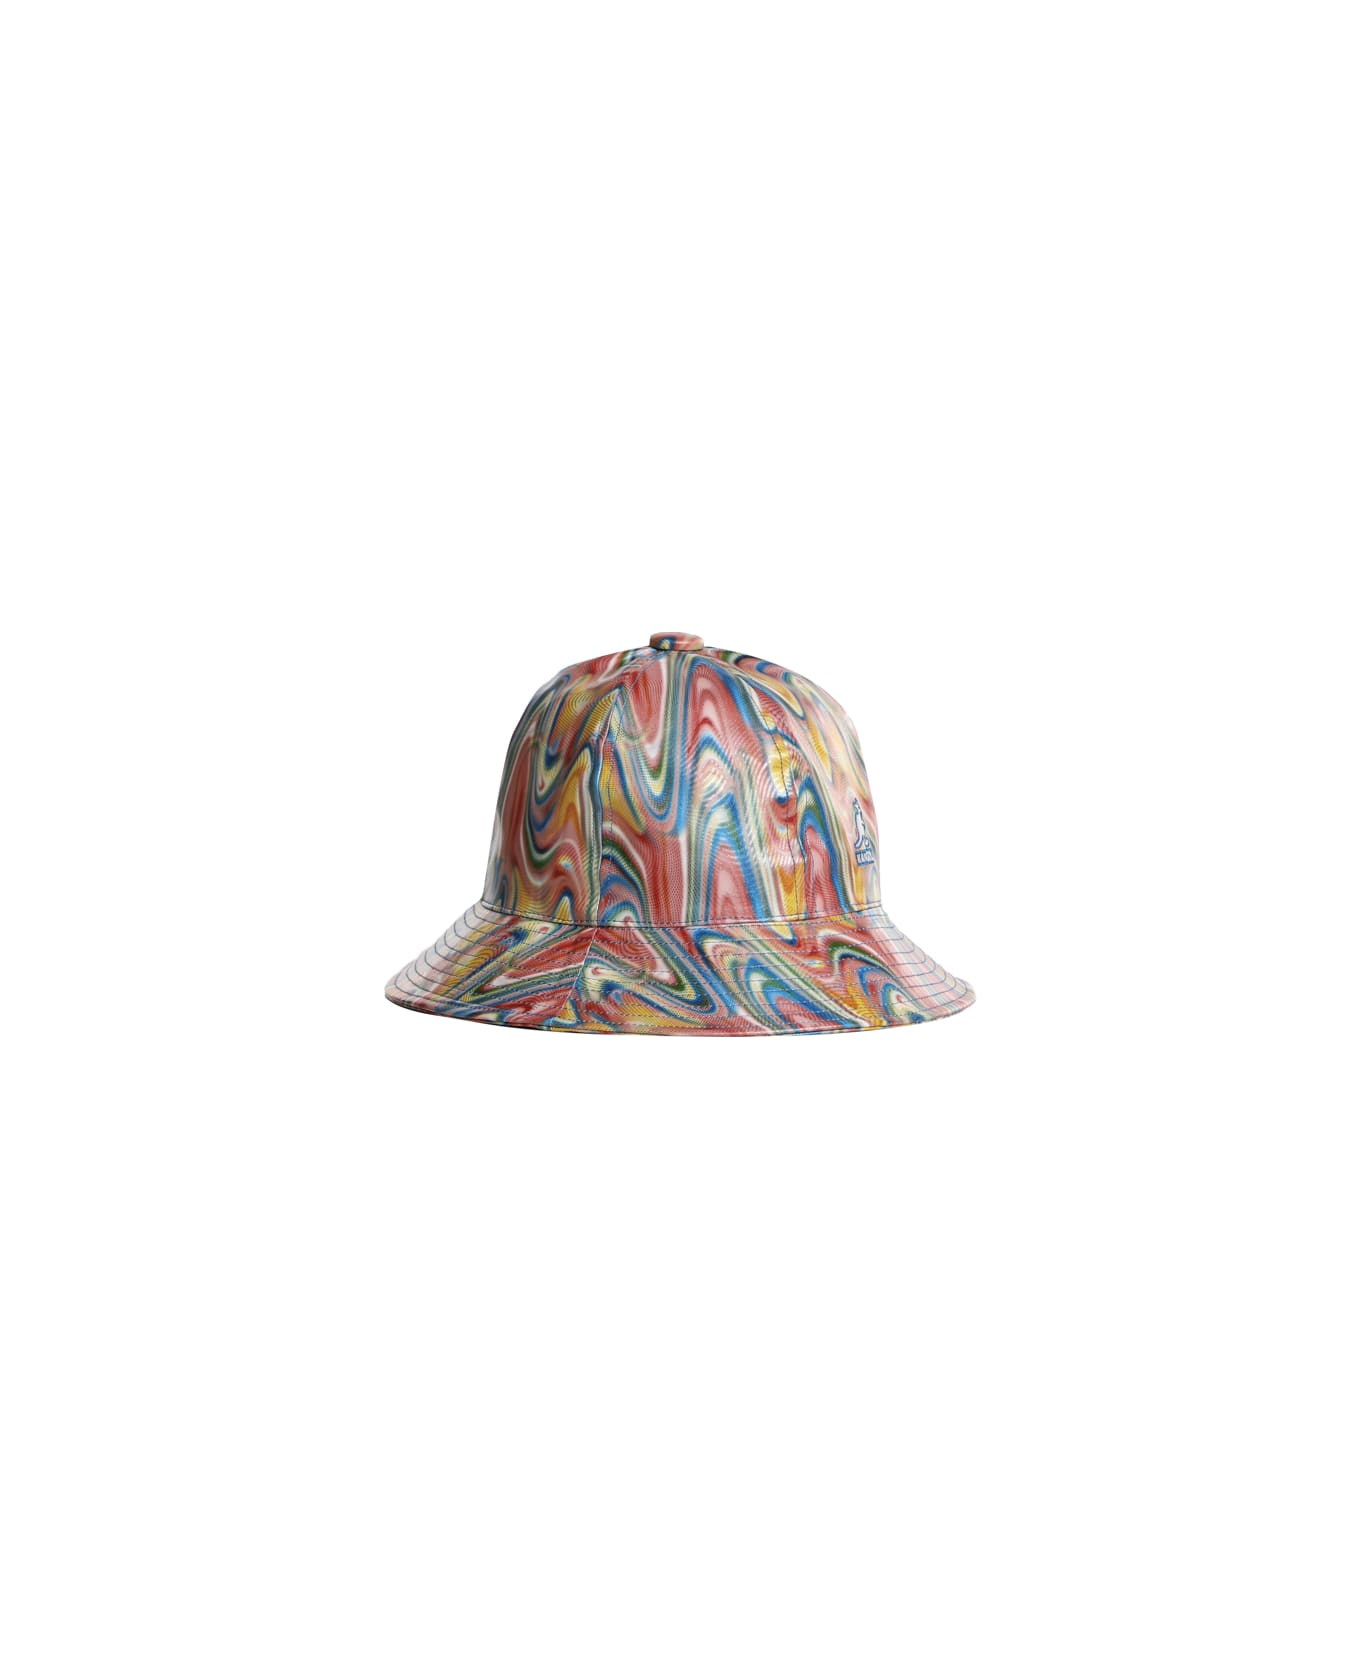 Kangol Heatwave Casual With Psychedelic Print - Pepto rainbow